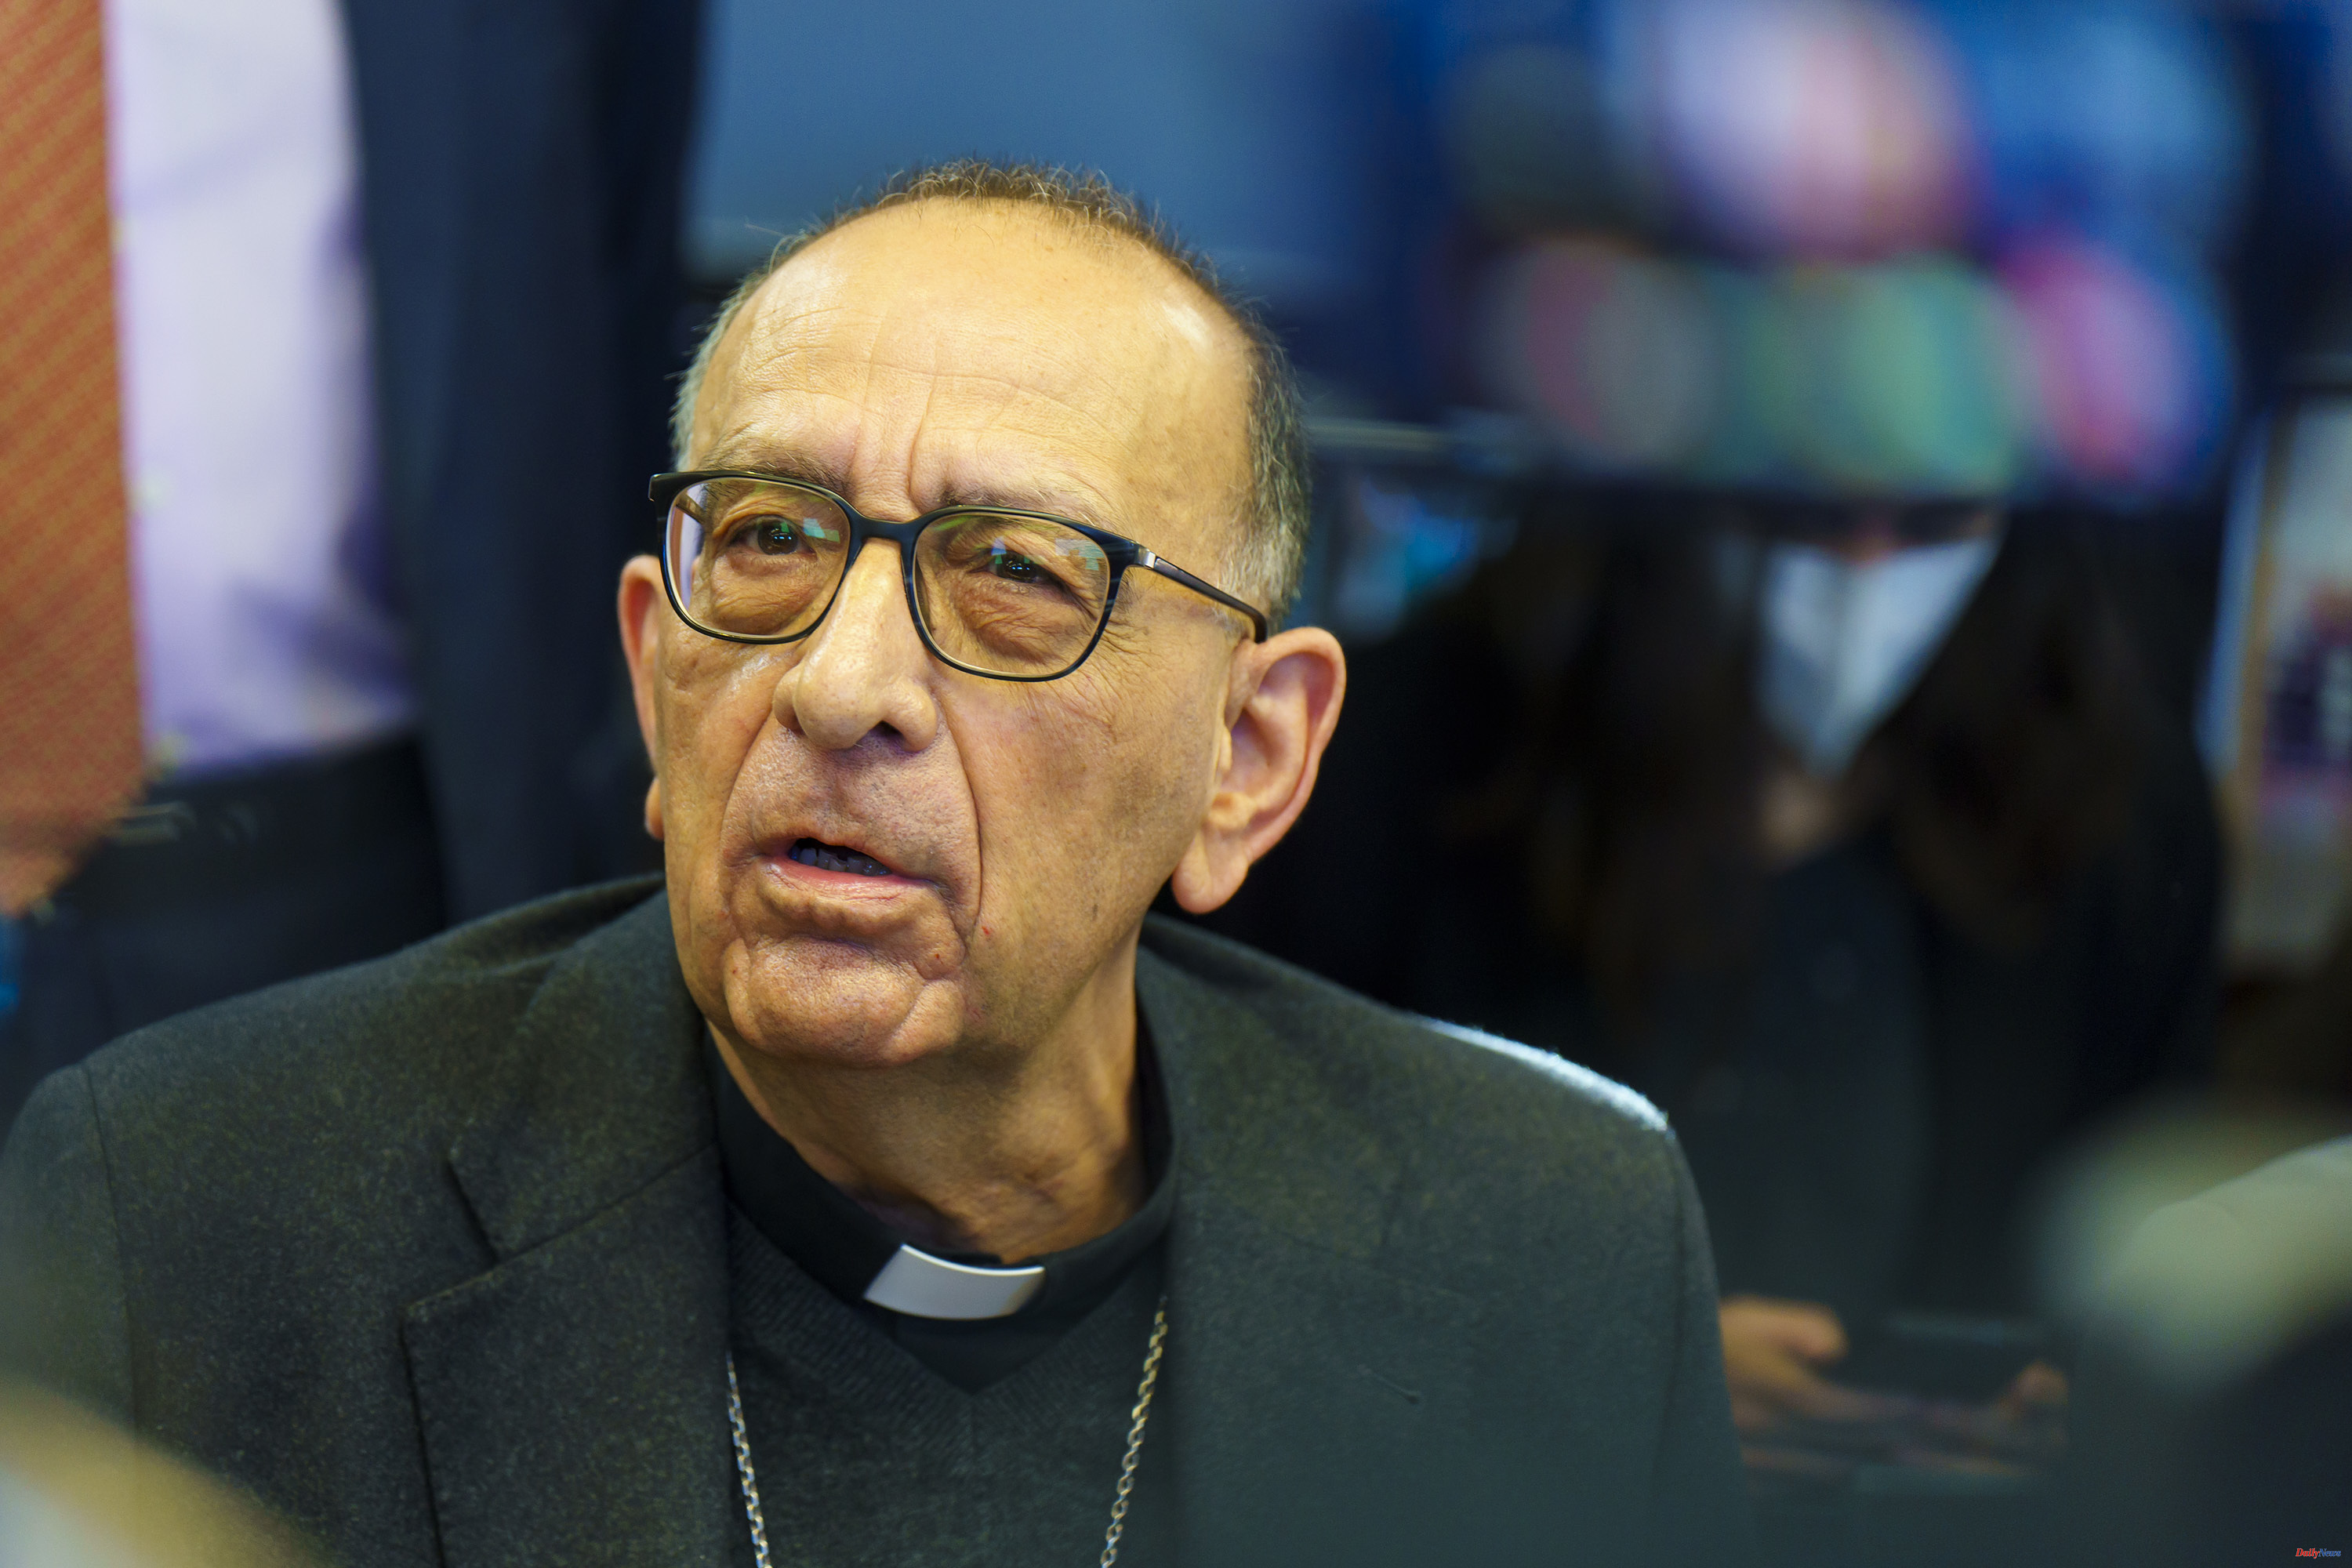 Spain The Prosecutor's Office asks the bishops for data on cases of sexual abuse and they respond that they have already sent them